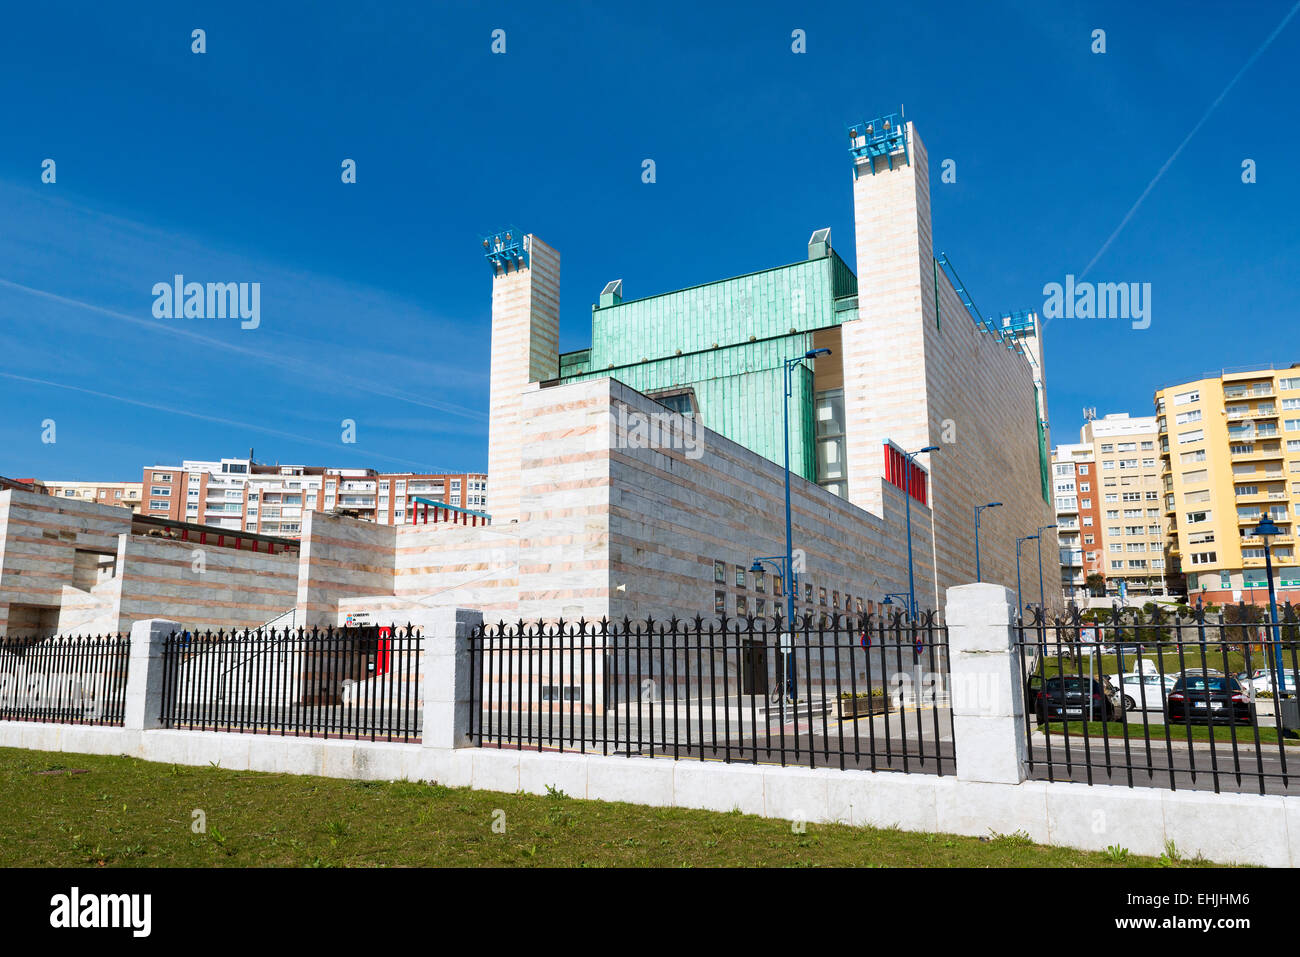 SANTANDER, SPAIN - MARCH 10, 2015: The new Festival palace in the city of Santander, Cantabria, Spain Stock Photo